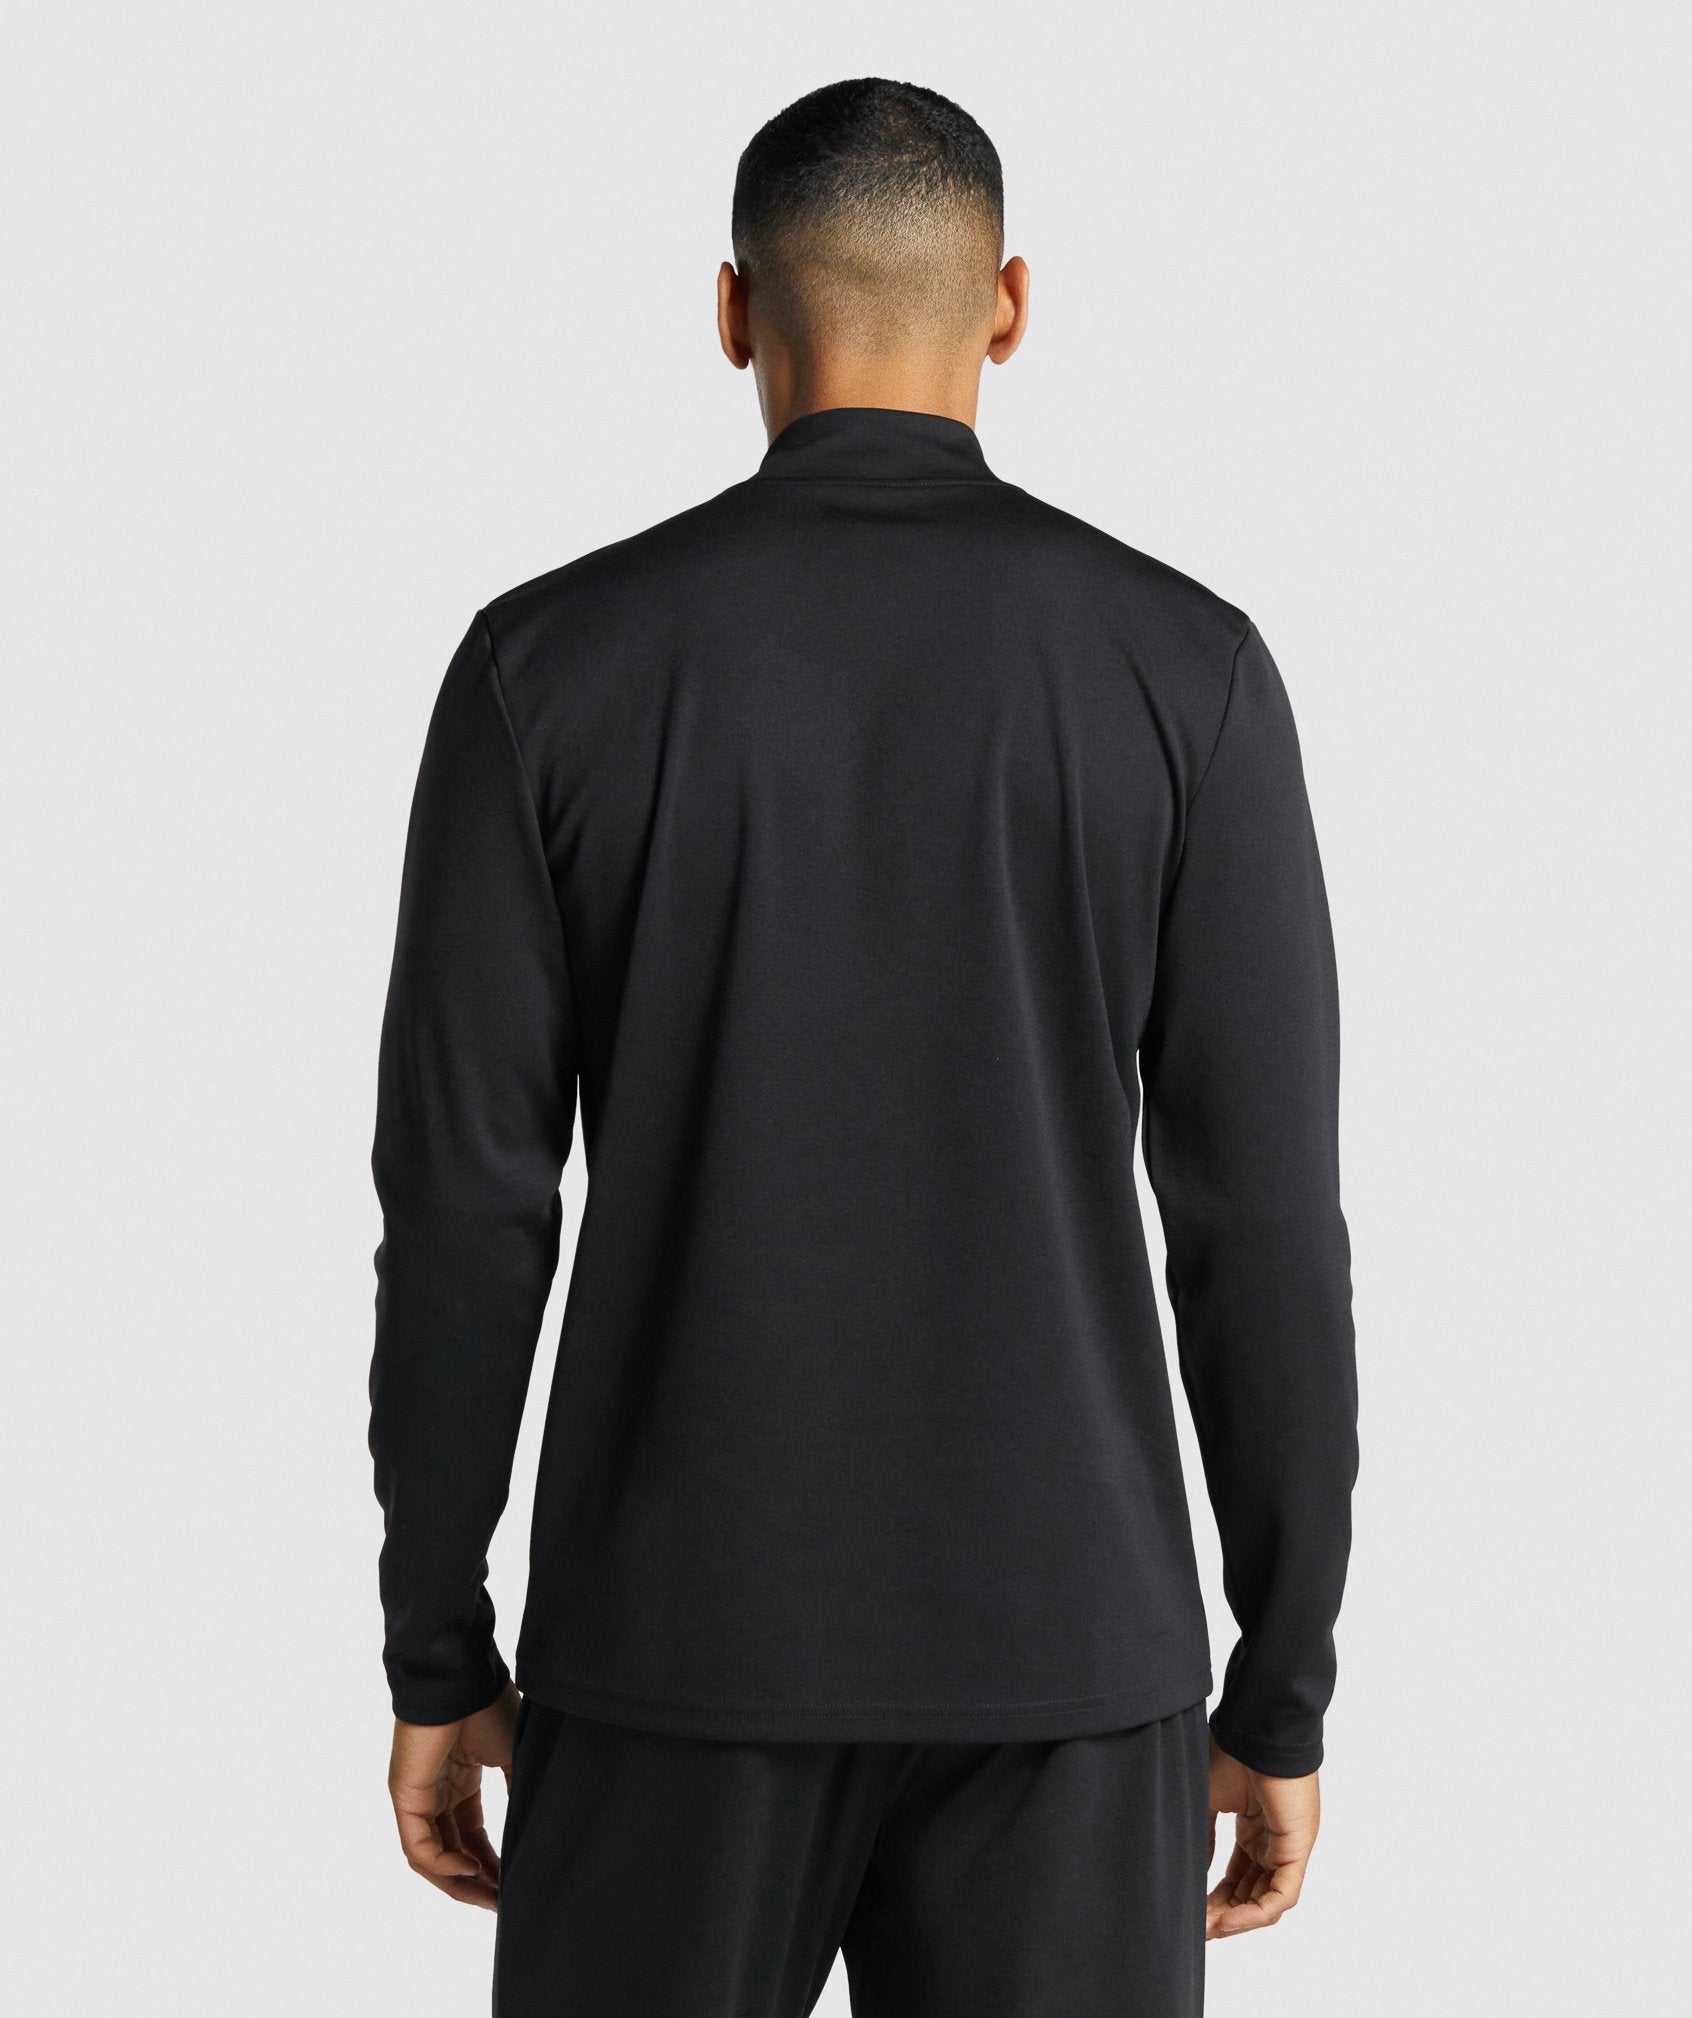 Arrival 1/4 Zip Pullover in Black - view 2